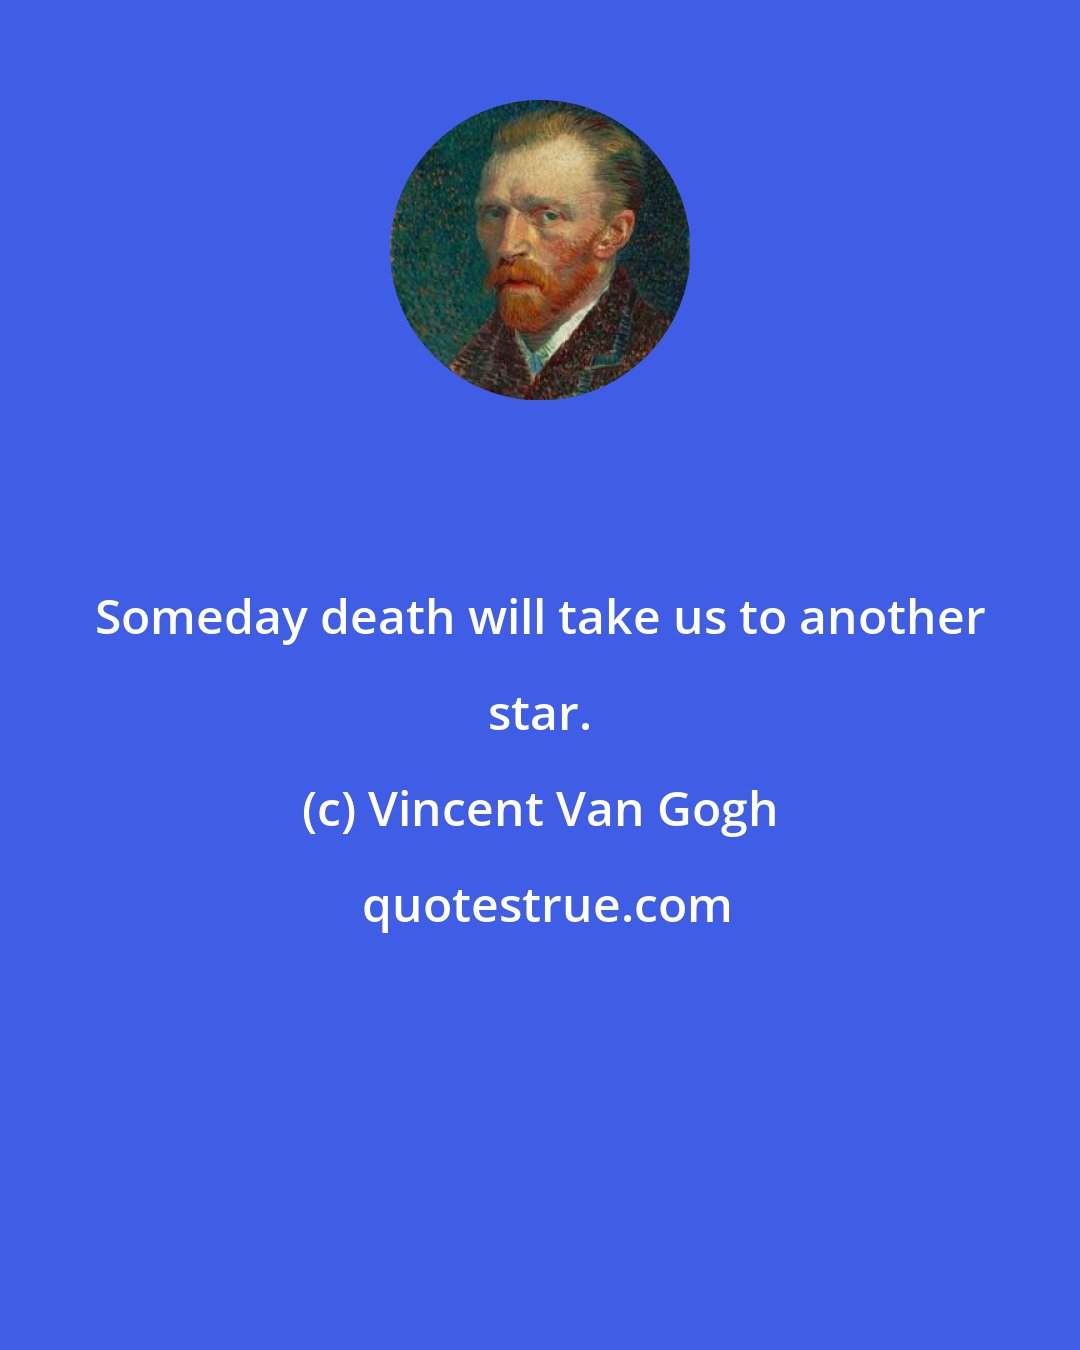 Vincent Van Gogh: Someday death will take us to another star.